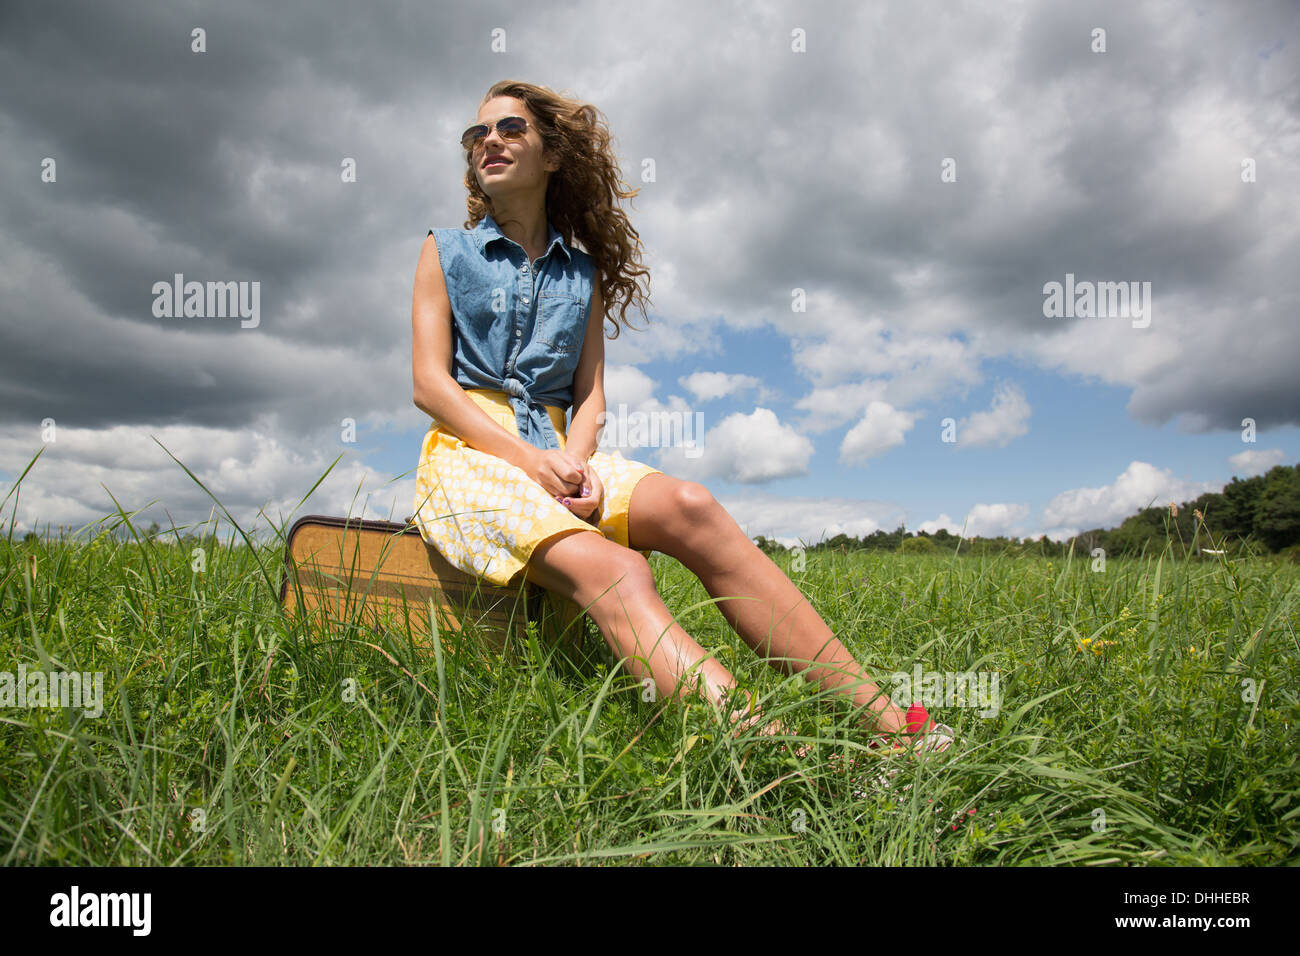 Teenage girl sitting on suitcase in field Stock Photo